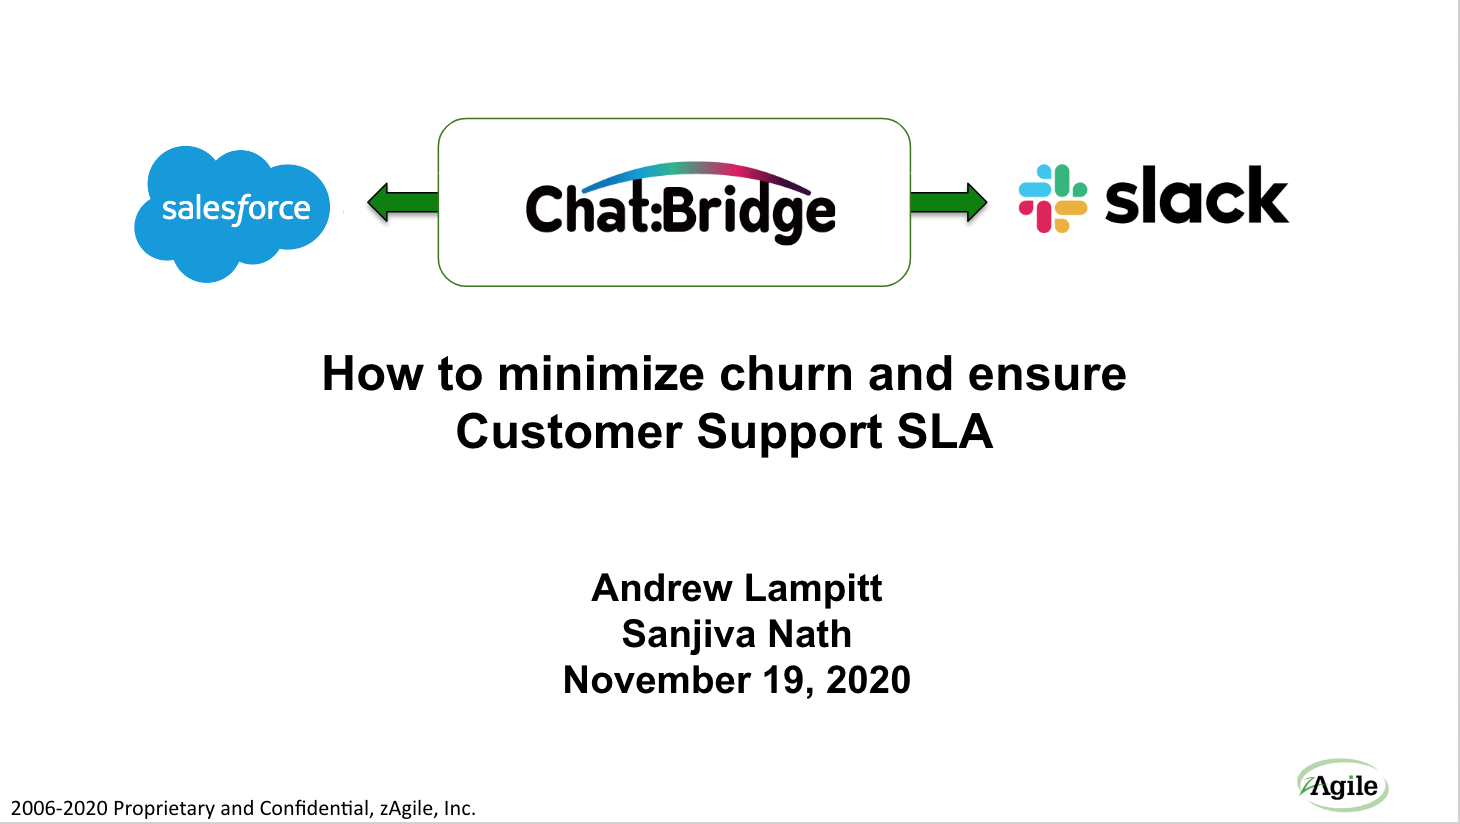 How to Minimize Churn and Ensure Customer Support SLA